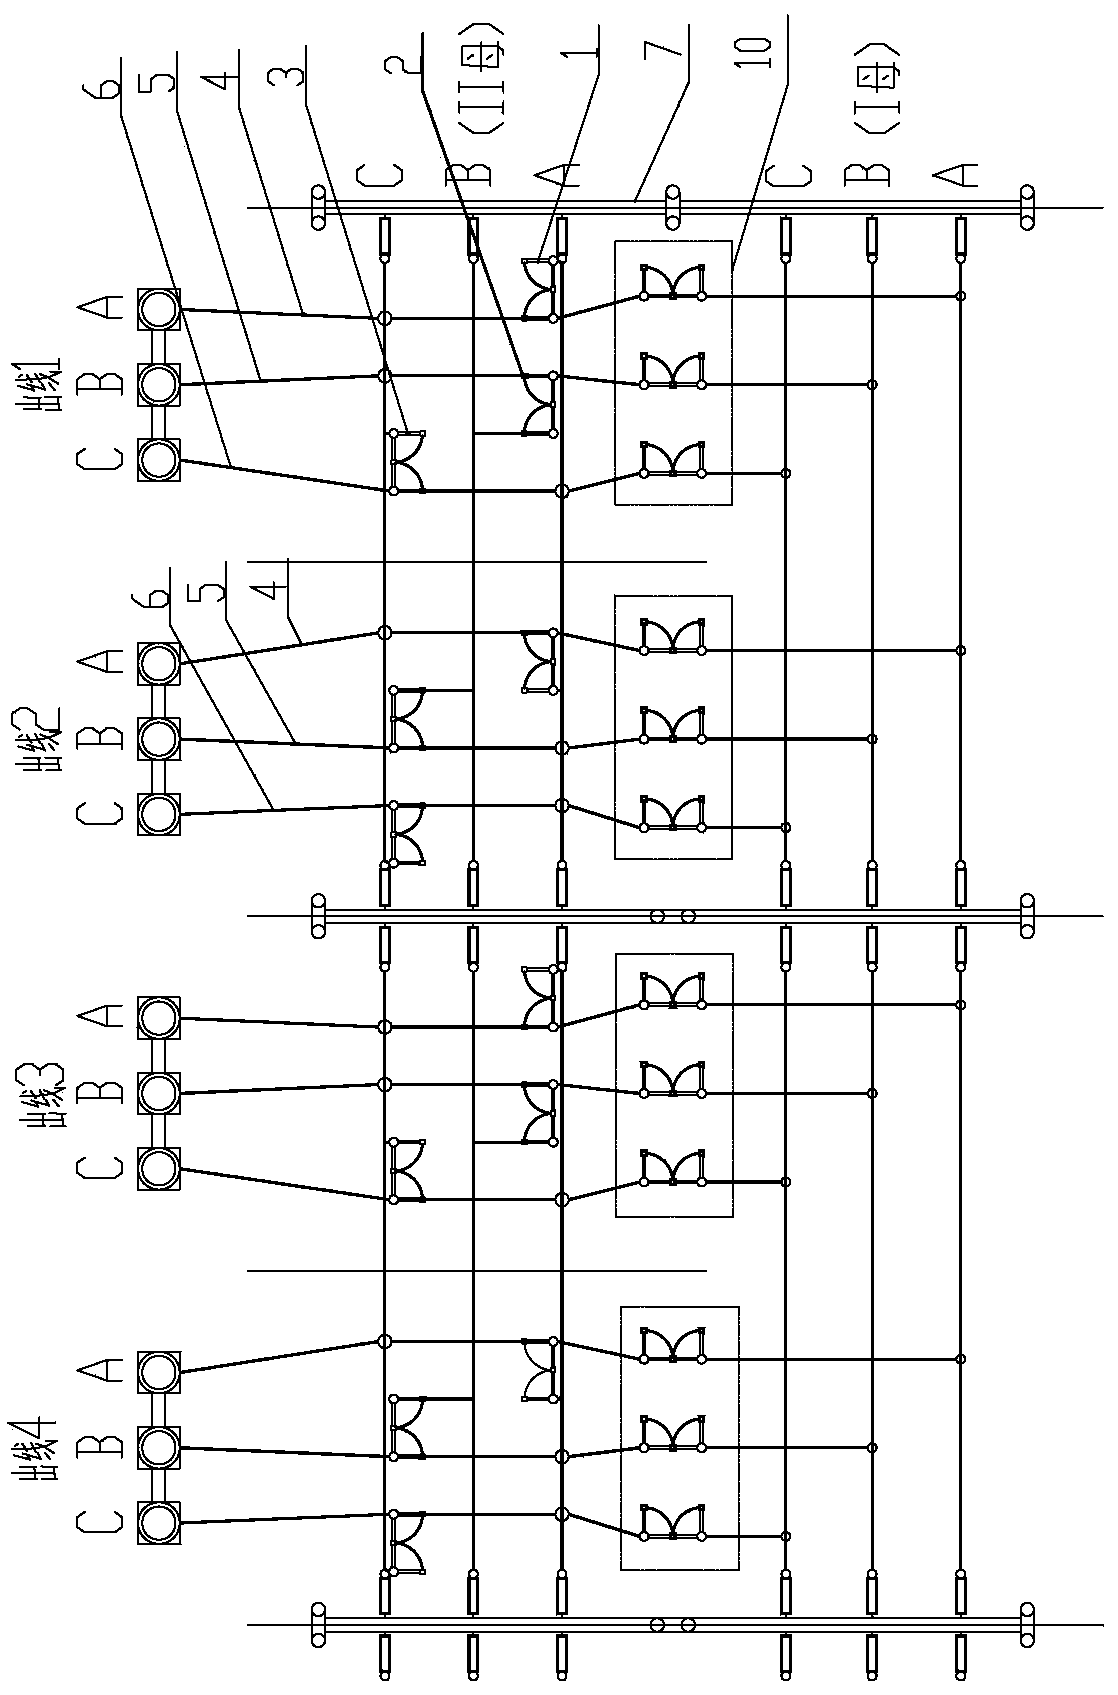 Arrangement structure of high voltage isolating switch in substation